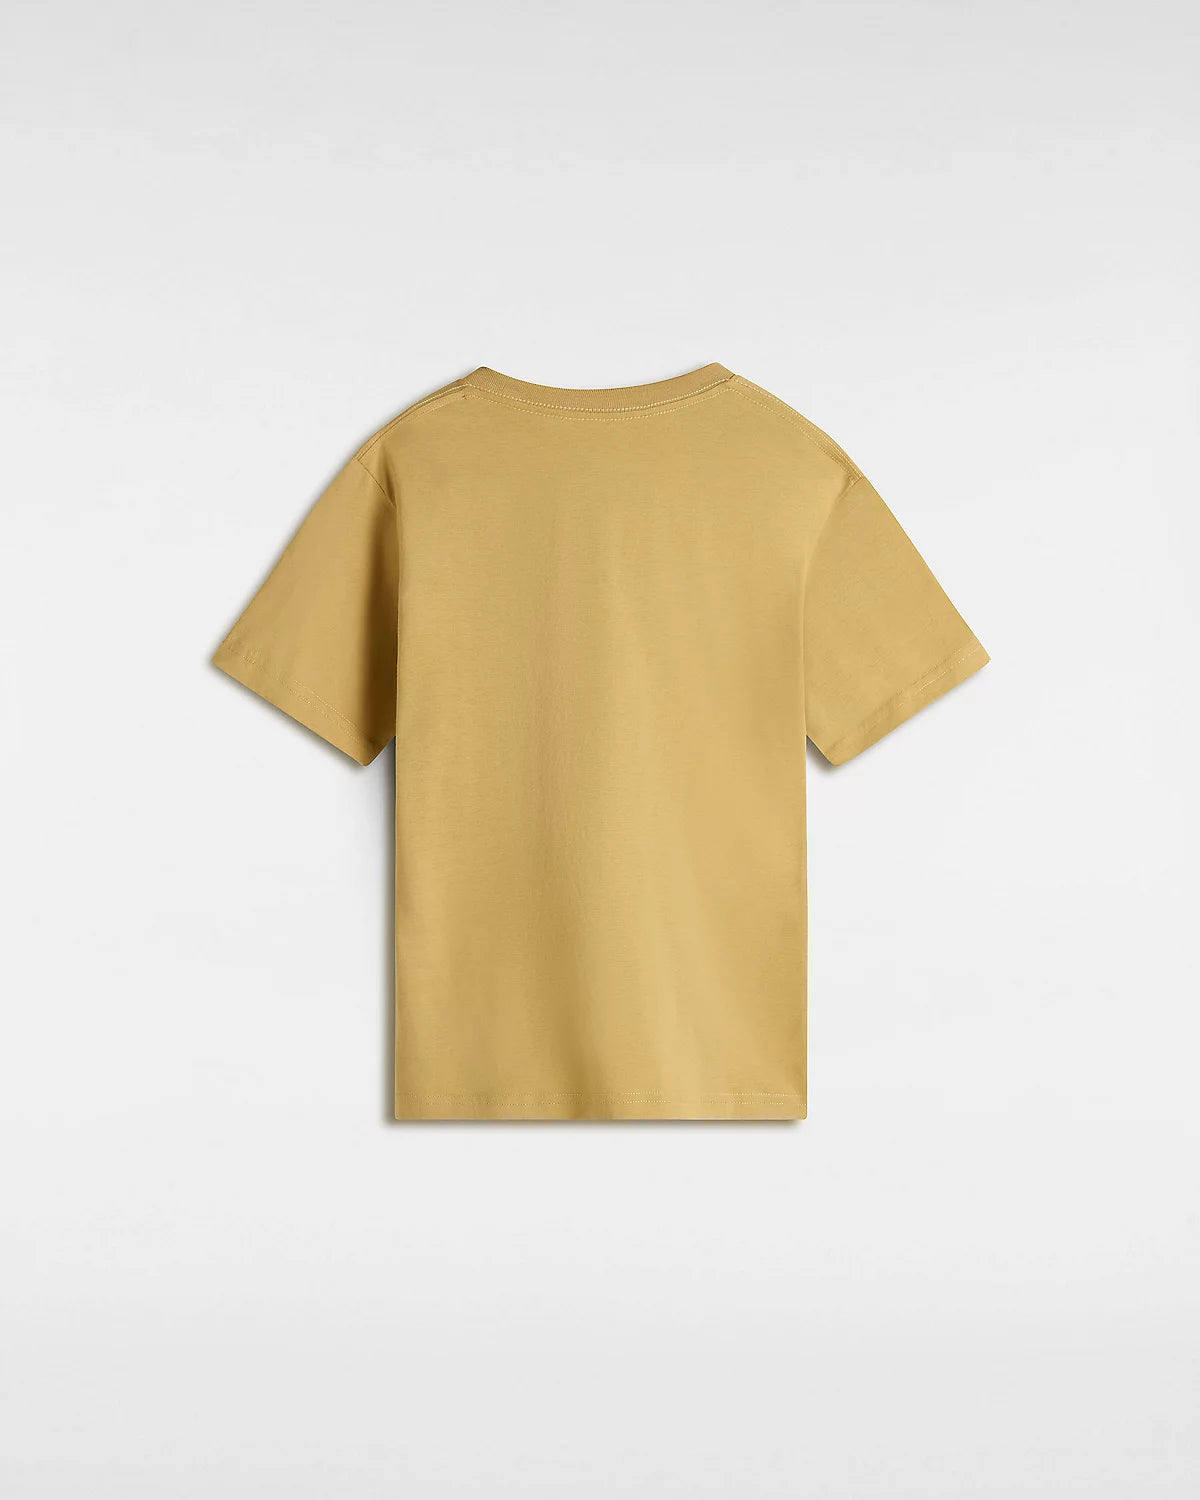 VANS - STYLE76 SS YOUTH TEE - ANTELOPE